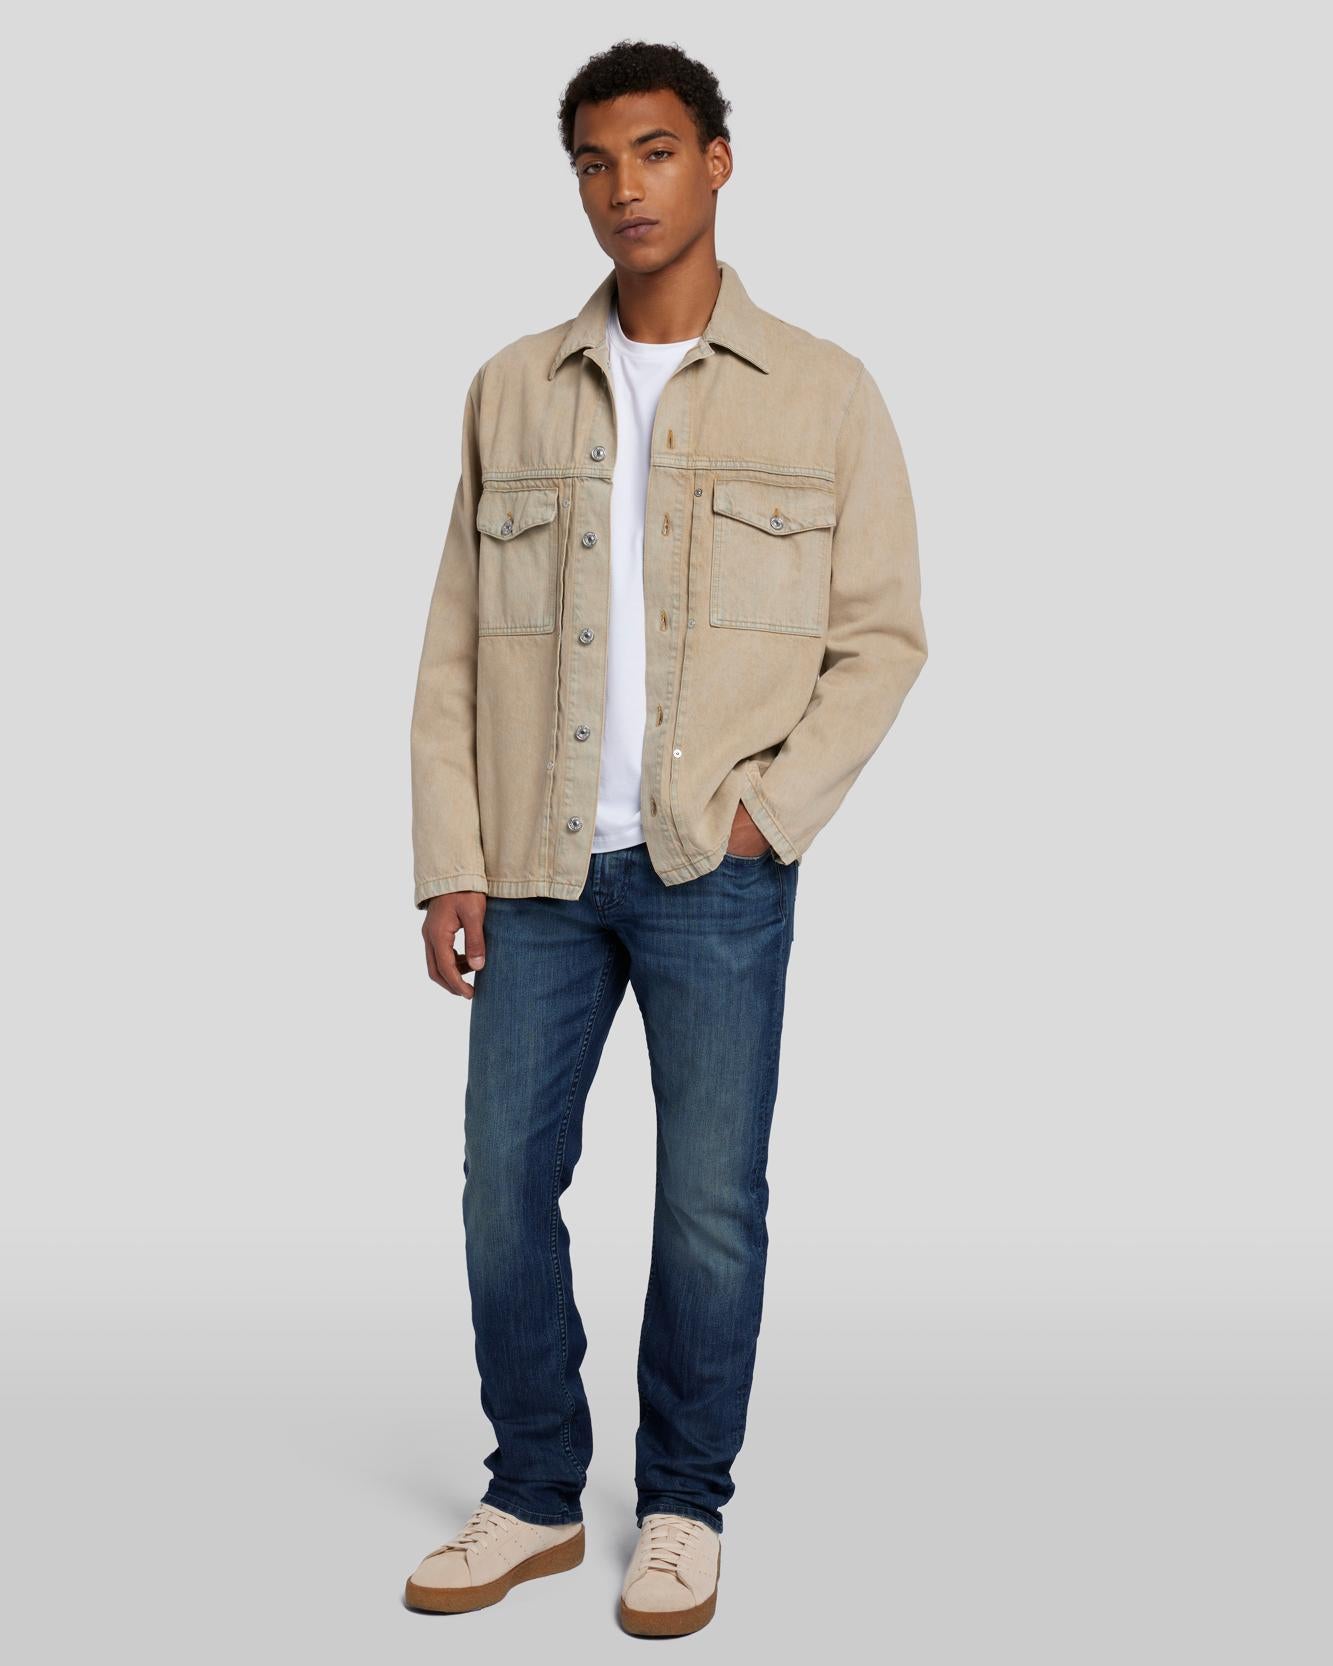 Jean Jacket Photos and Images